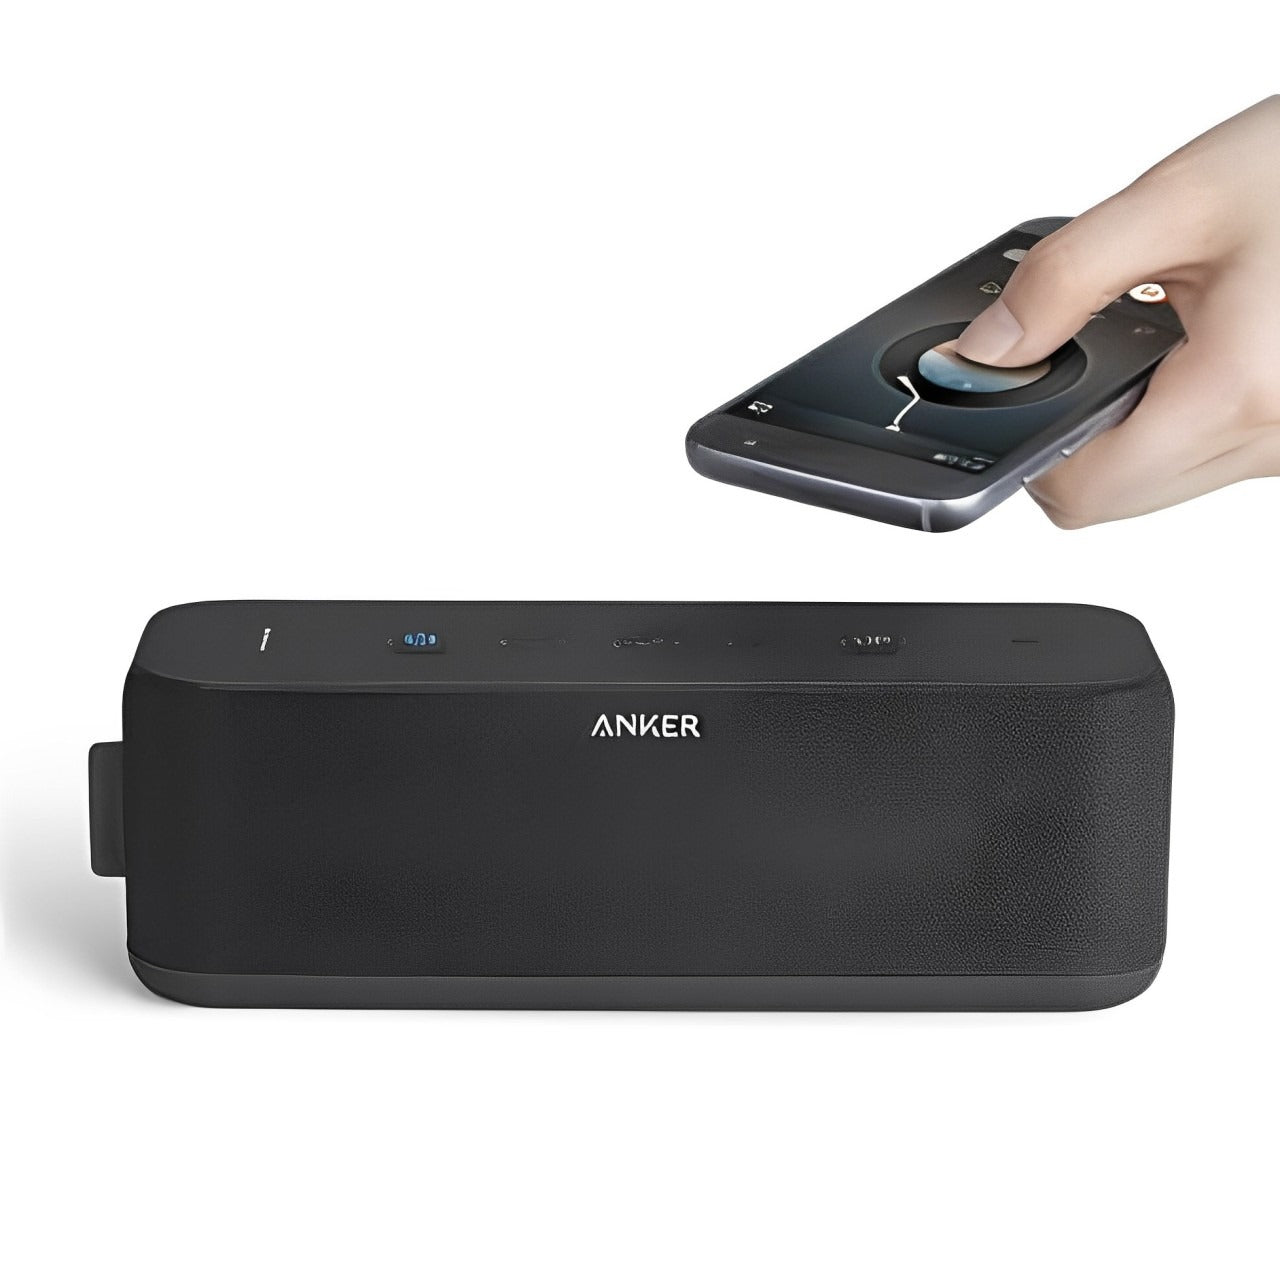 ANKER Soundcore Boost Portable Waterproof Bluetooth Speaker Controlled Through Mobile Phone.